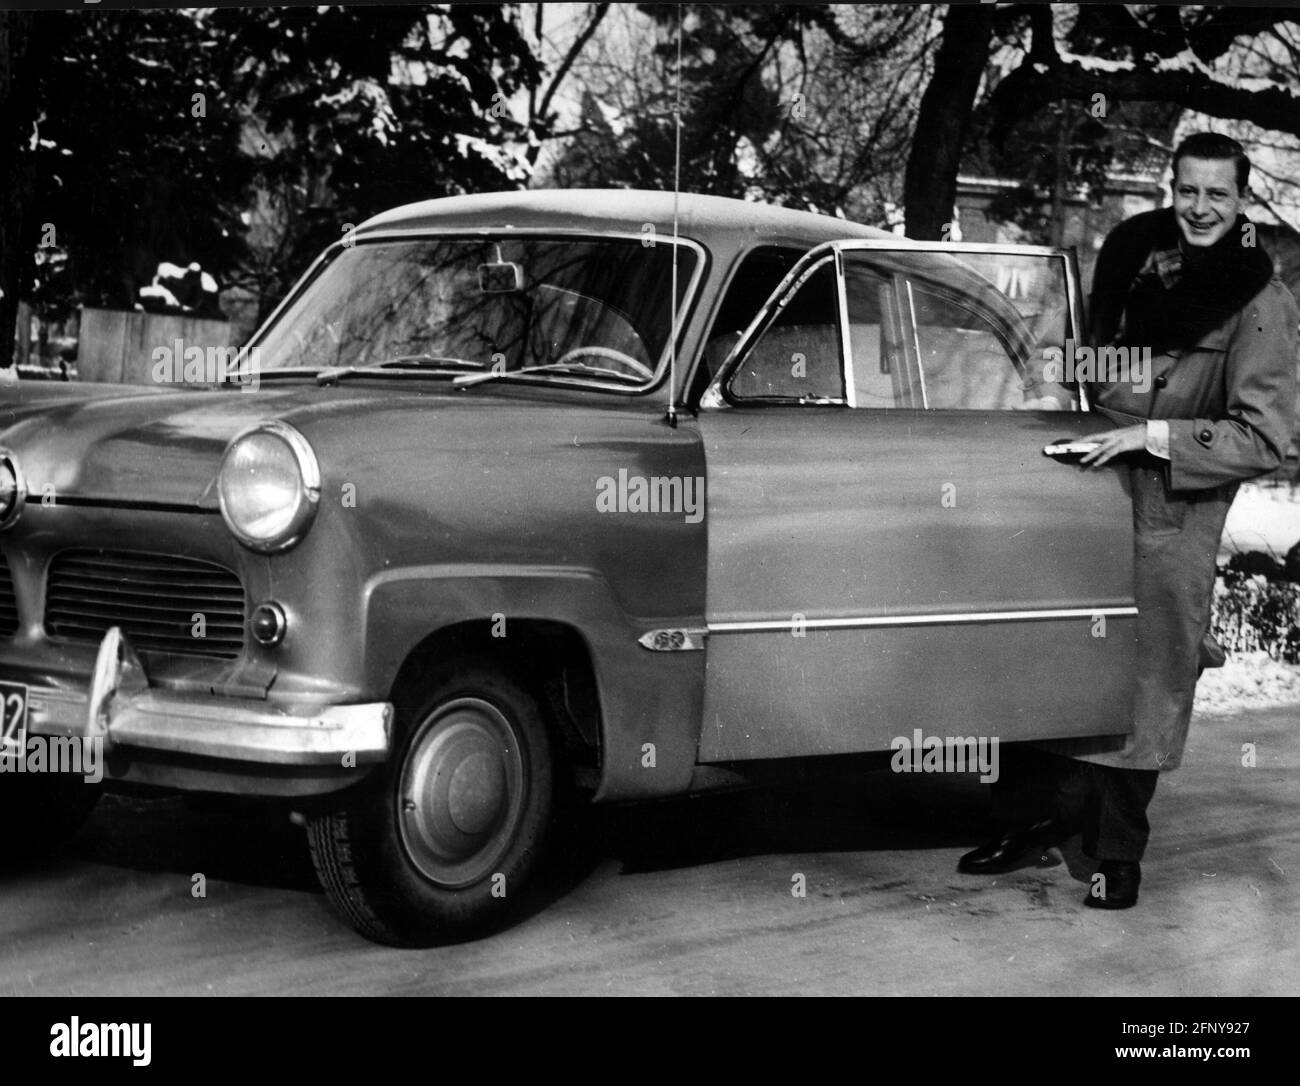 Borsche, Dieter, 25.10.1909 - 8.5.1982, German actor, half length, with his car, 1950s, ADDITIONAL-RIGHTS-CLEARANCE-INFO-NOT-AVAILABLE Stock Photo